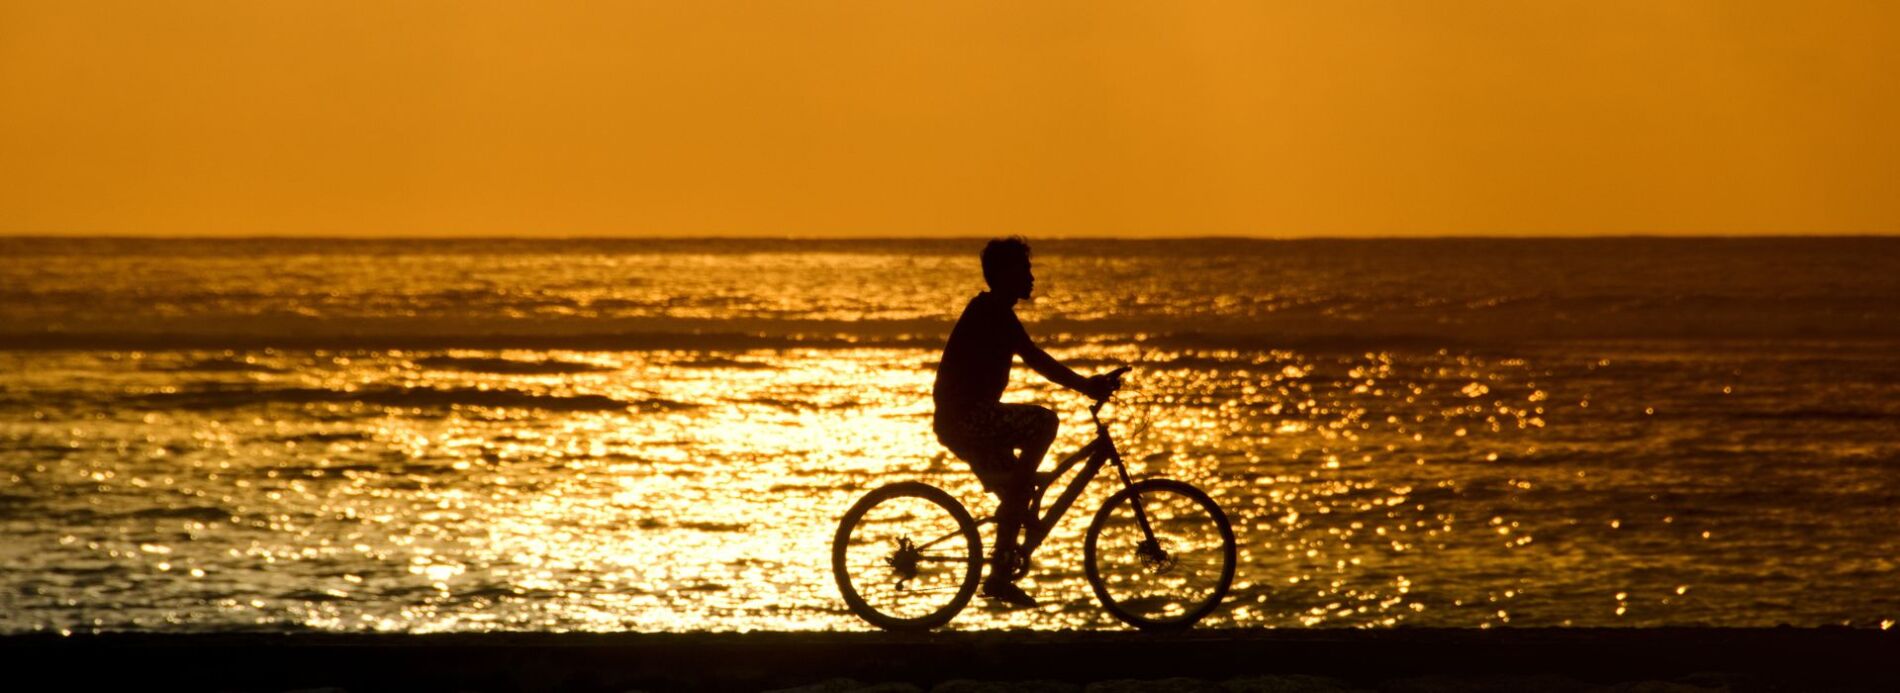 riding bicycle on beach at sunset